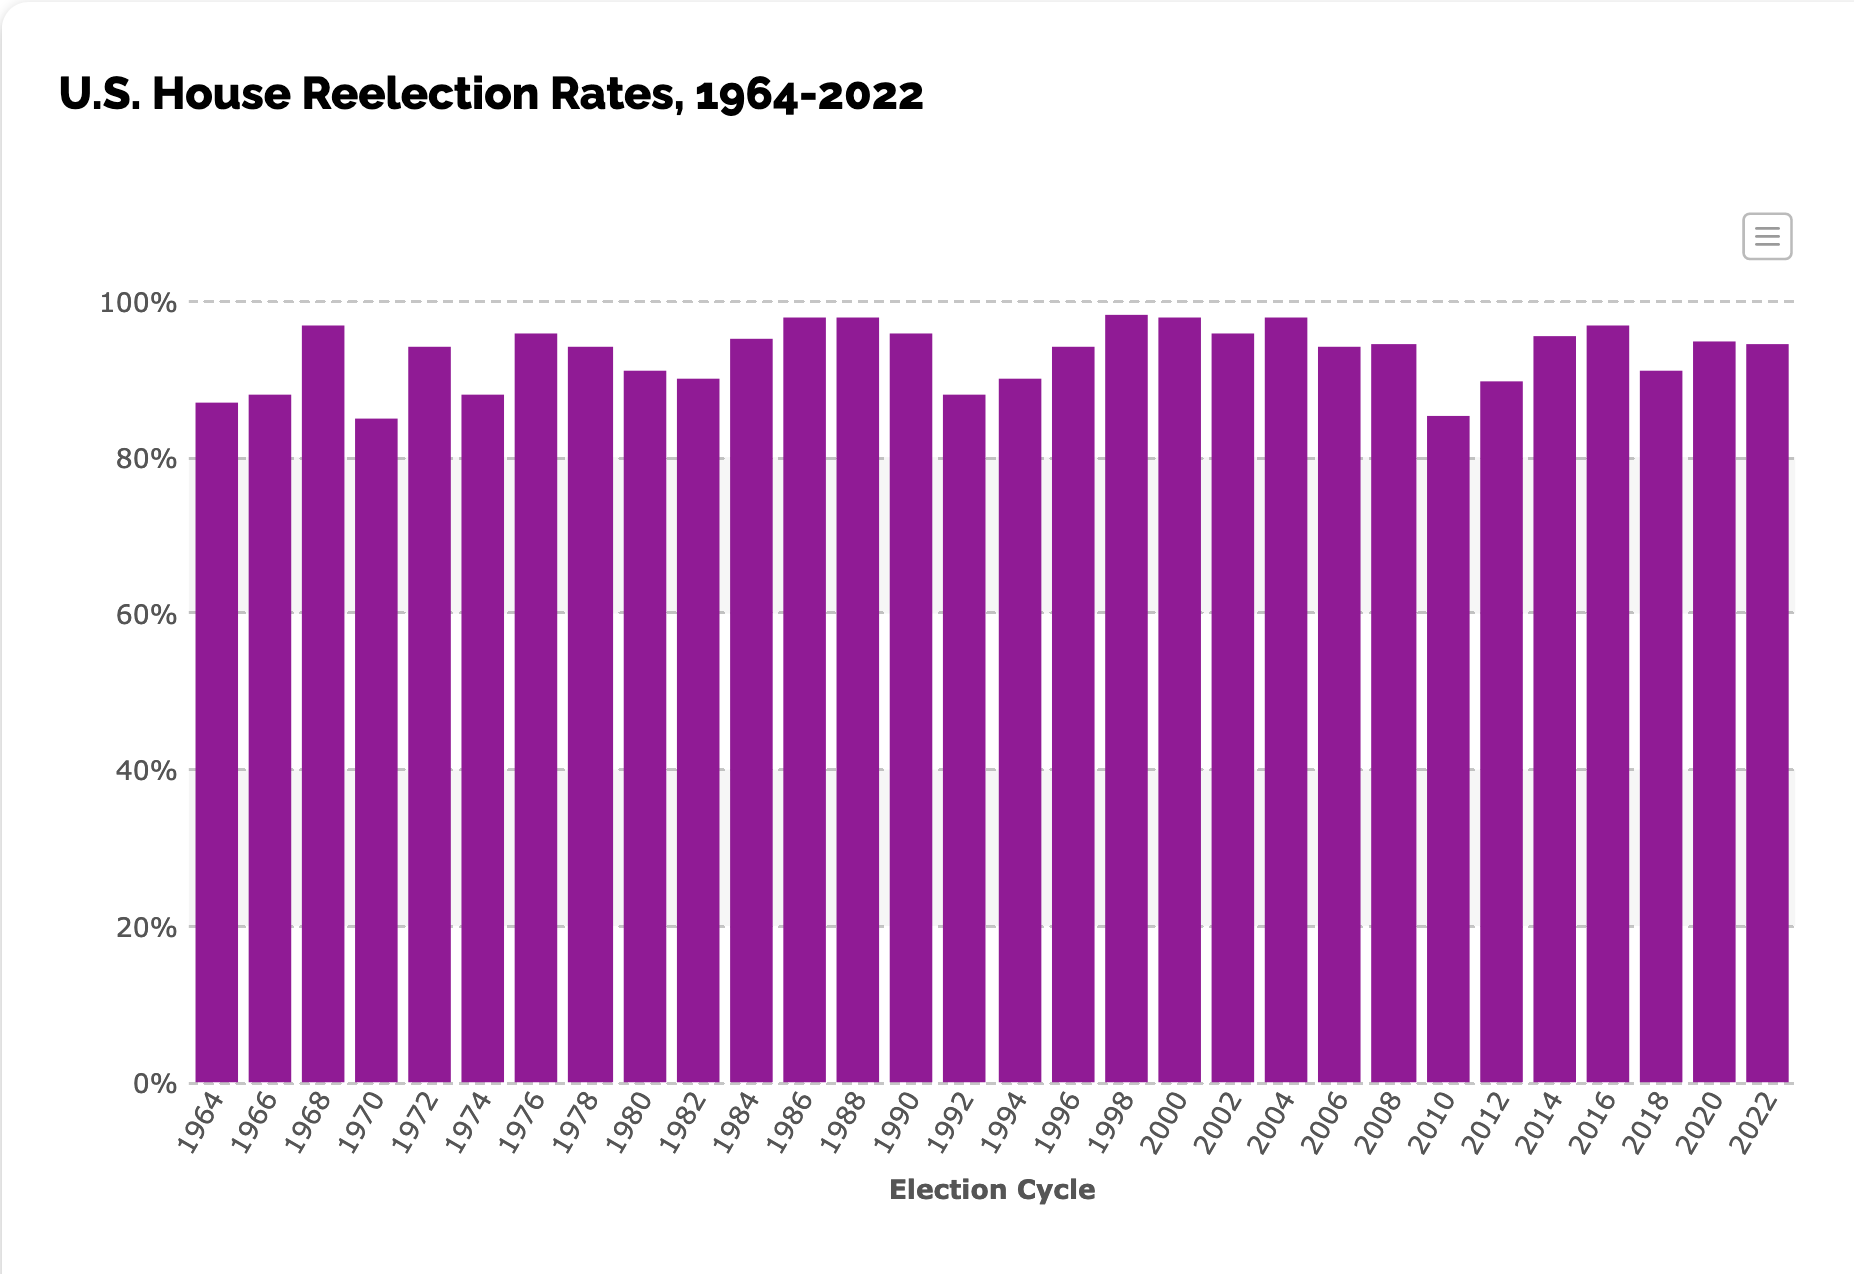 Bar graph of U.S. House Reelection Rates